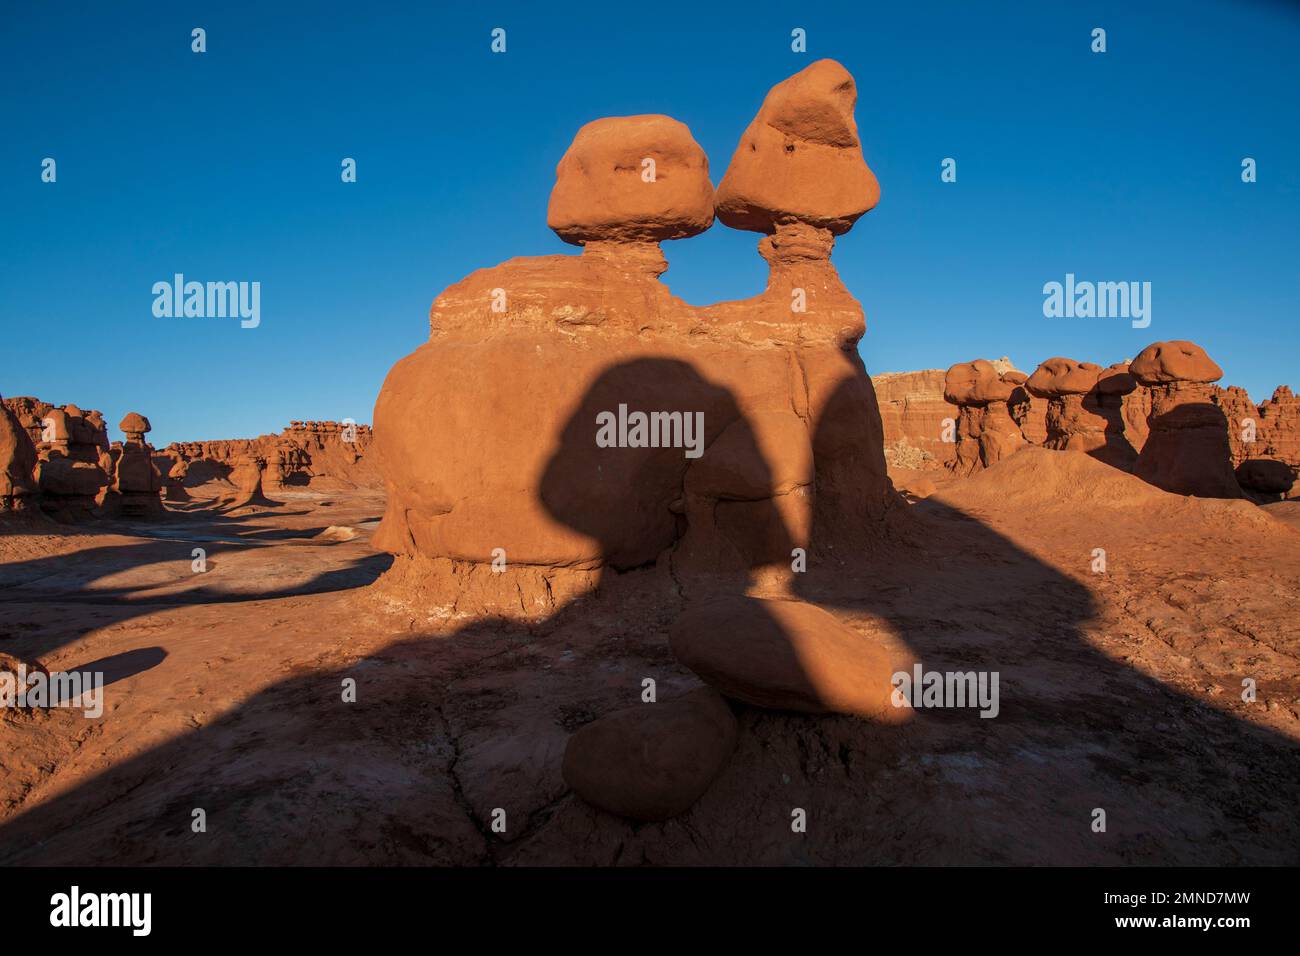 Utah's Goblin Valley State Park is full of sandstone rock formations that take the shape of humanoid characters. Stock Photo